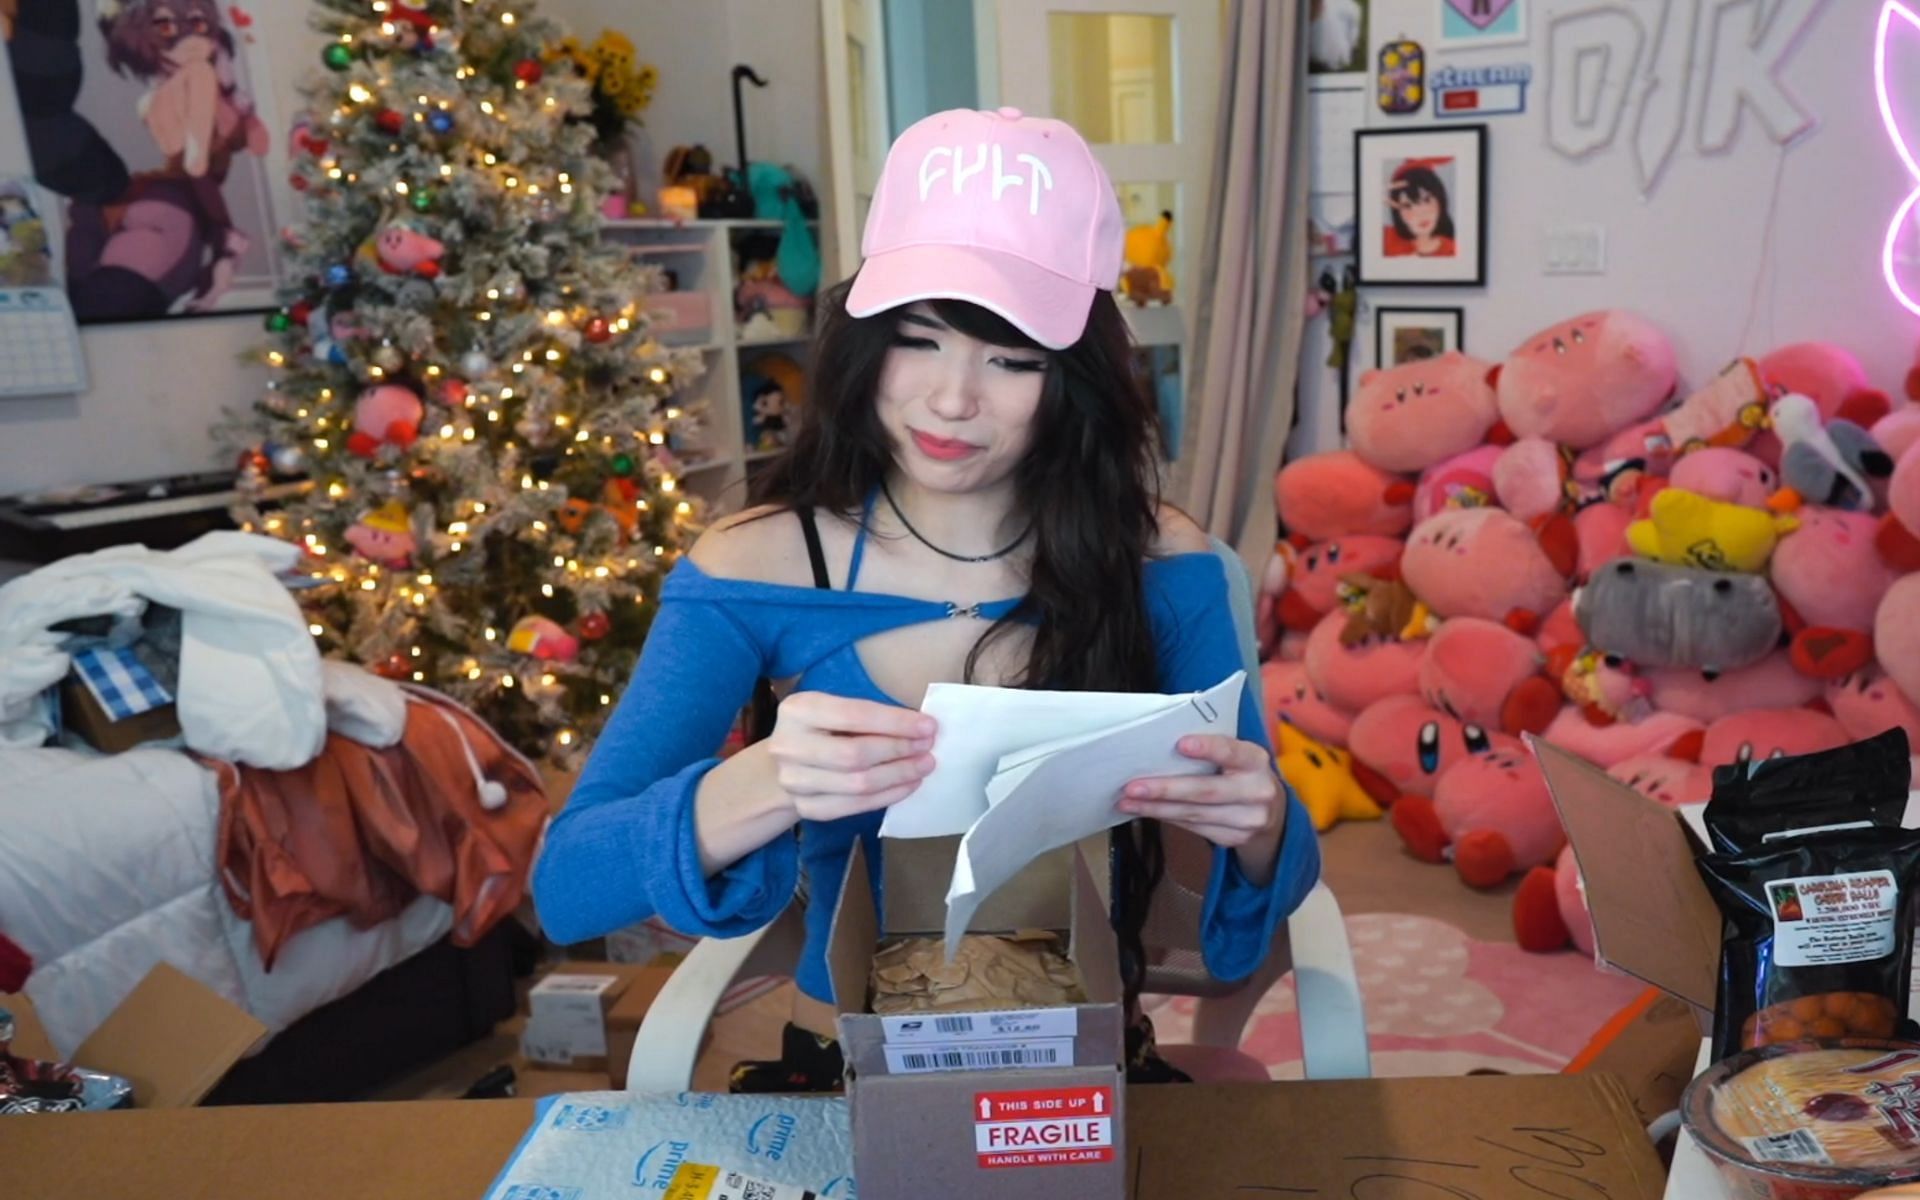 Emiru was rendered speechless after unboxing a questionable item during the PO Box opening stream (Image via Emiru/Twitch)